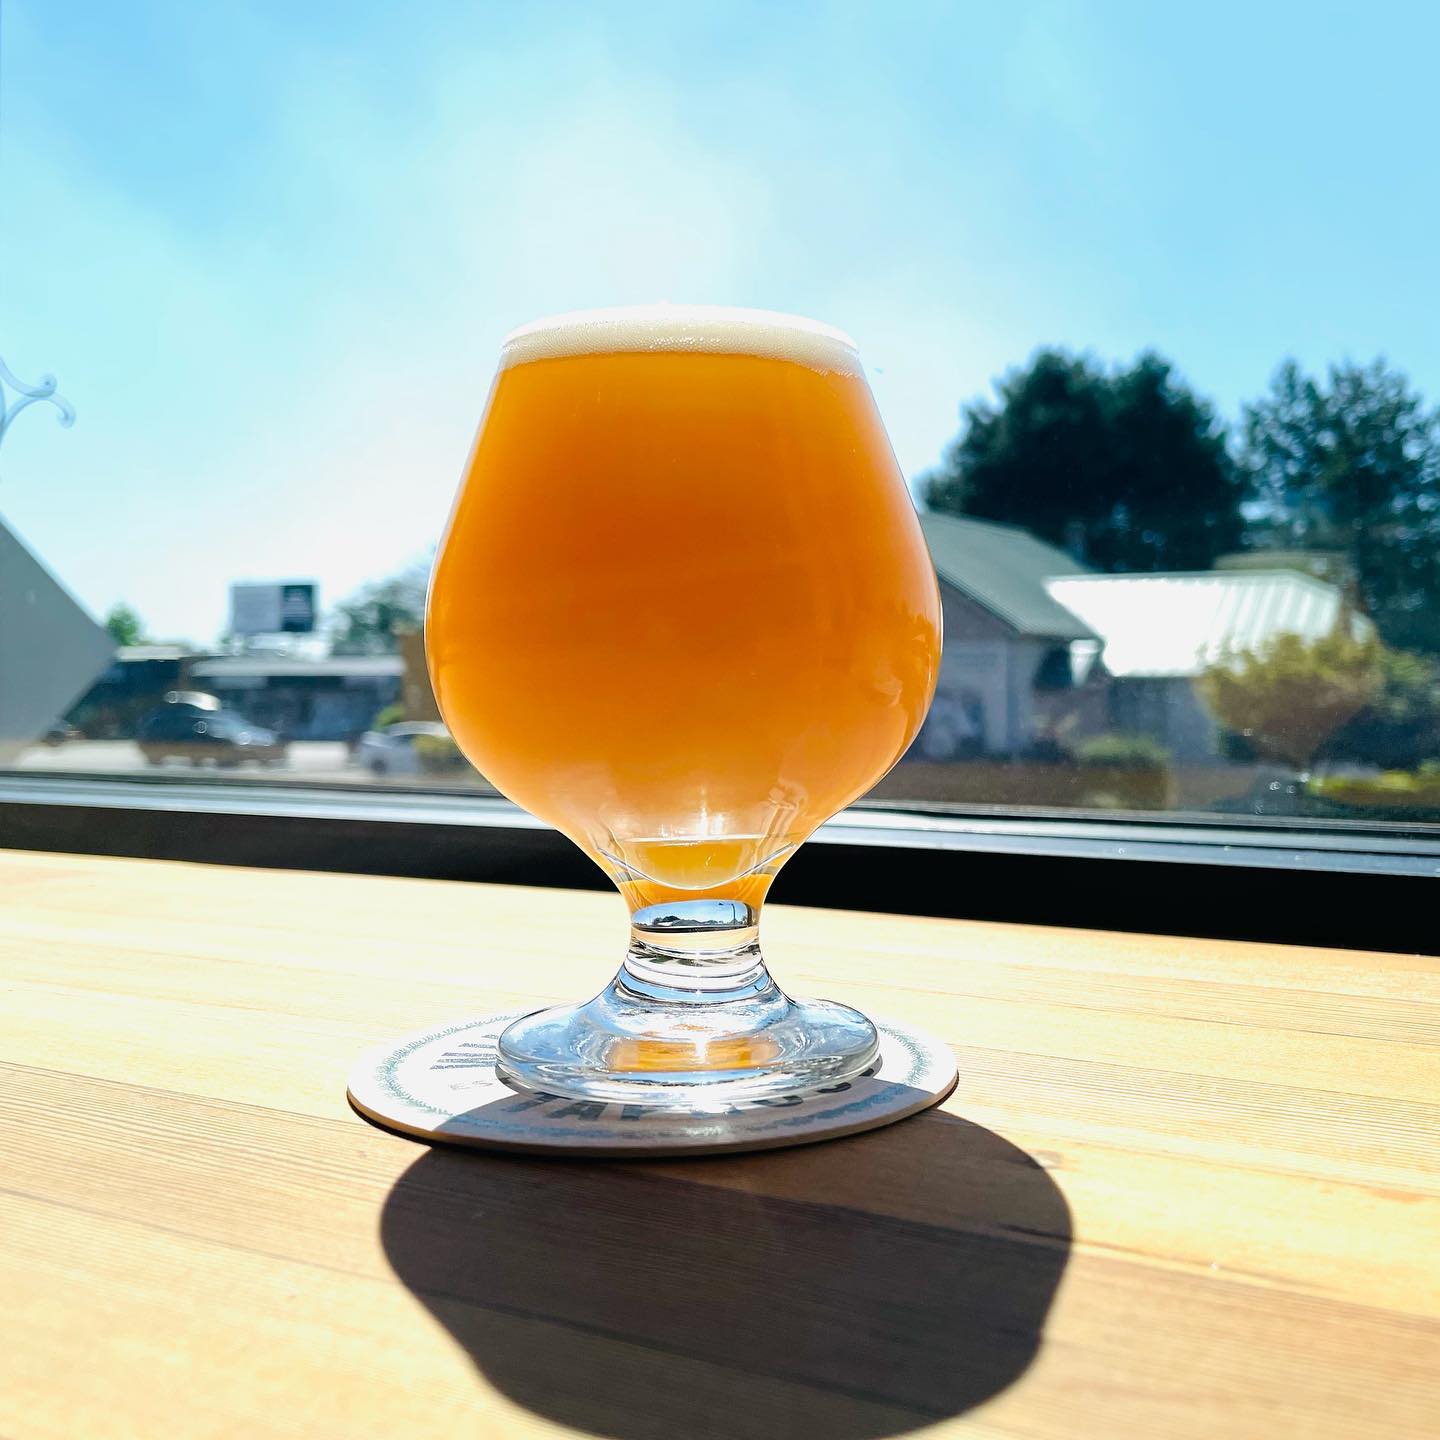 The release of our @trapdoorbrewing collab is here! “A Mega Pint?” is a DDH Hazy Double IPA with HBC-586, Enigma and Citra hops. This incredible juicy IPA is surely to pair perfect with our hot weather. Come by and grab a (mega) pint and a 4 pack or two to-go!! *Available at both locations*
.
.
.
.
.
Can Art: @airzzeppelin 
.
.
.
#wildwoodtap #wildwoodtaphouse #wildwood #trapdoor #amegapint #megapint #collabbeer #beavertonbeer #hillsborobeer #beerfriends #pnwbeer #pnw #pdx #pdxbeer #washingtonbeer #vancouverbeer #beerme #beernerds #beerstagram #beerlover #craftbeer #craftbeerlover #partyon